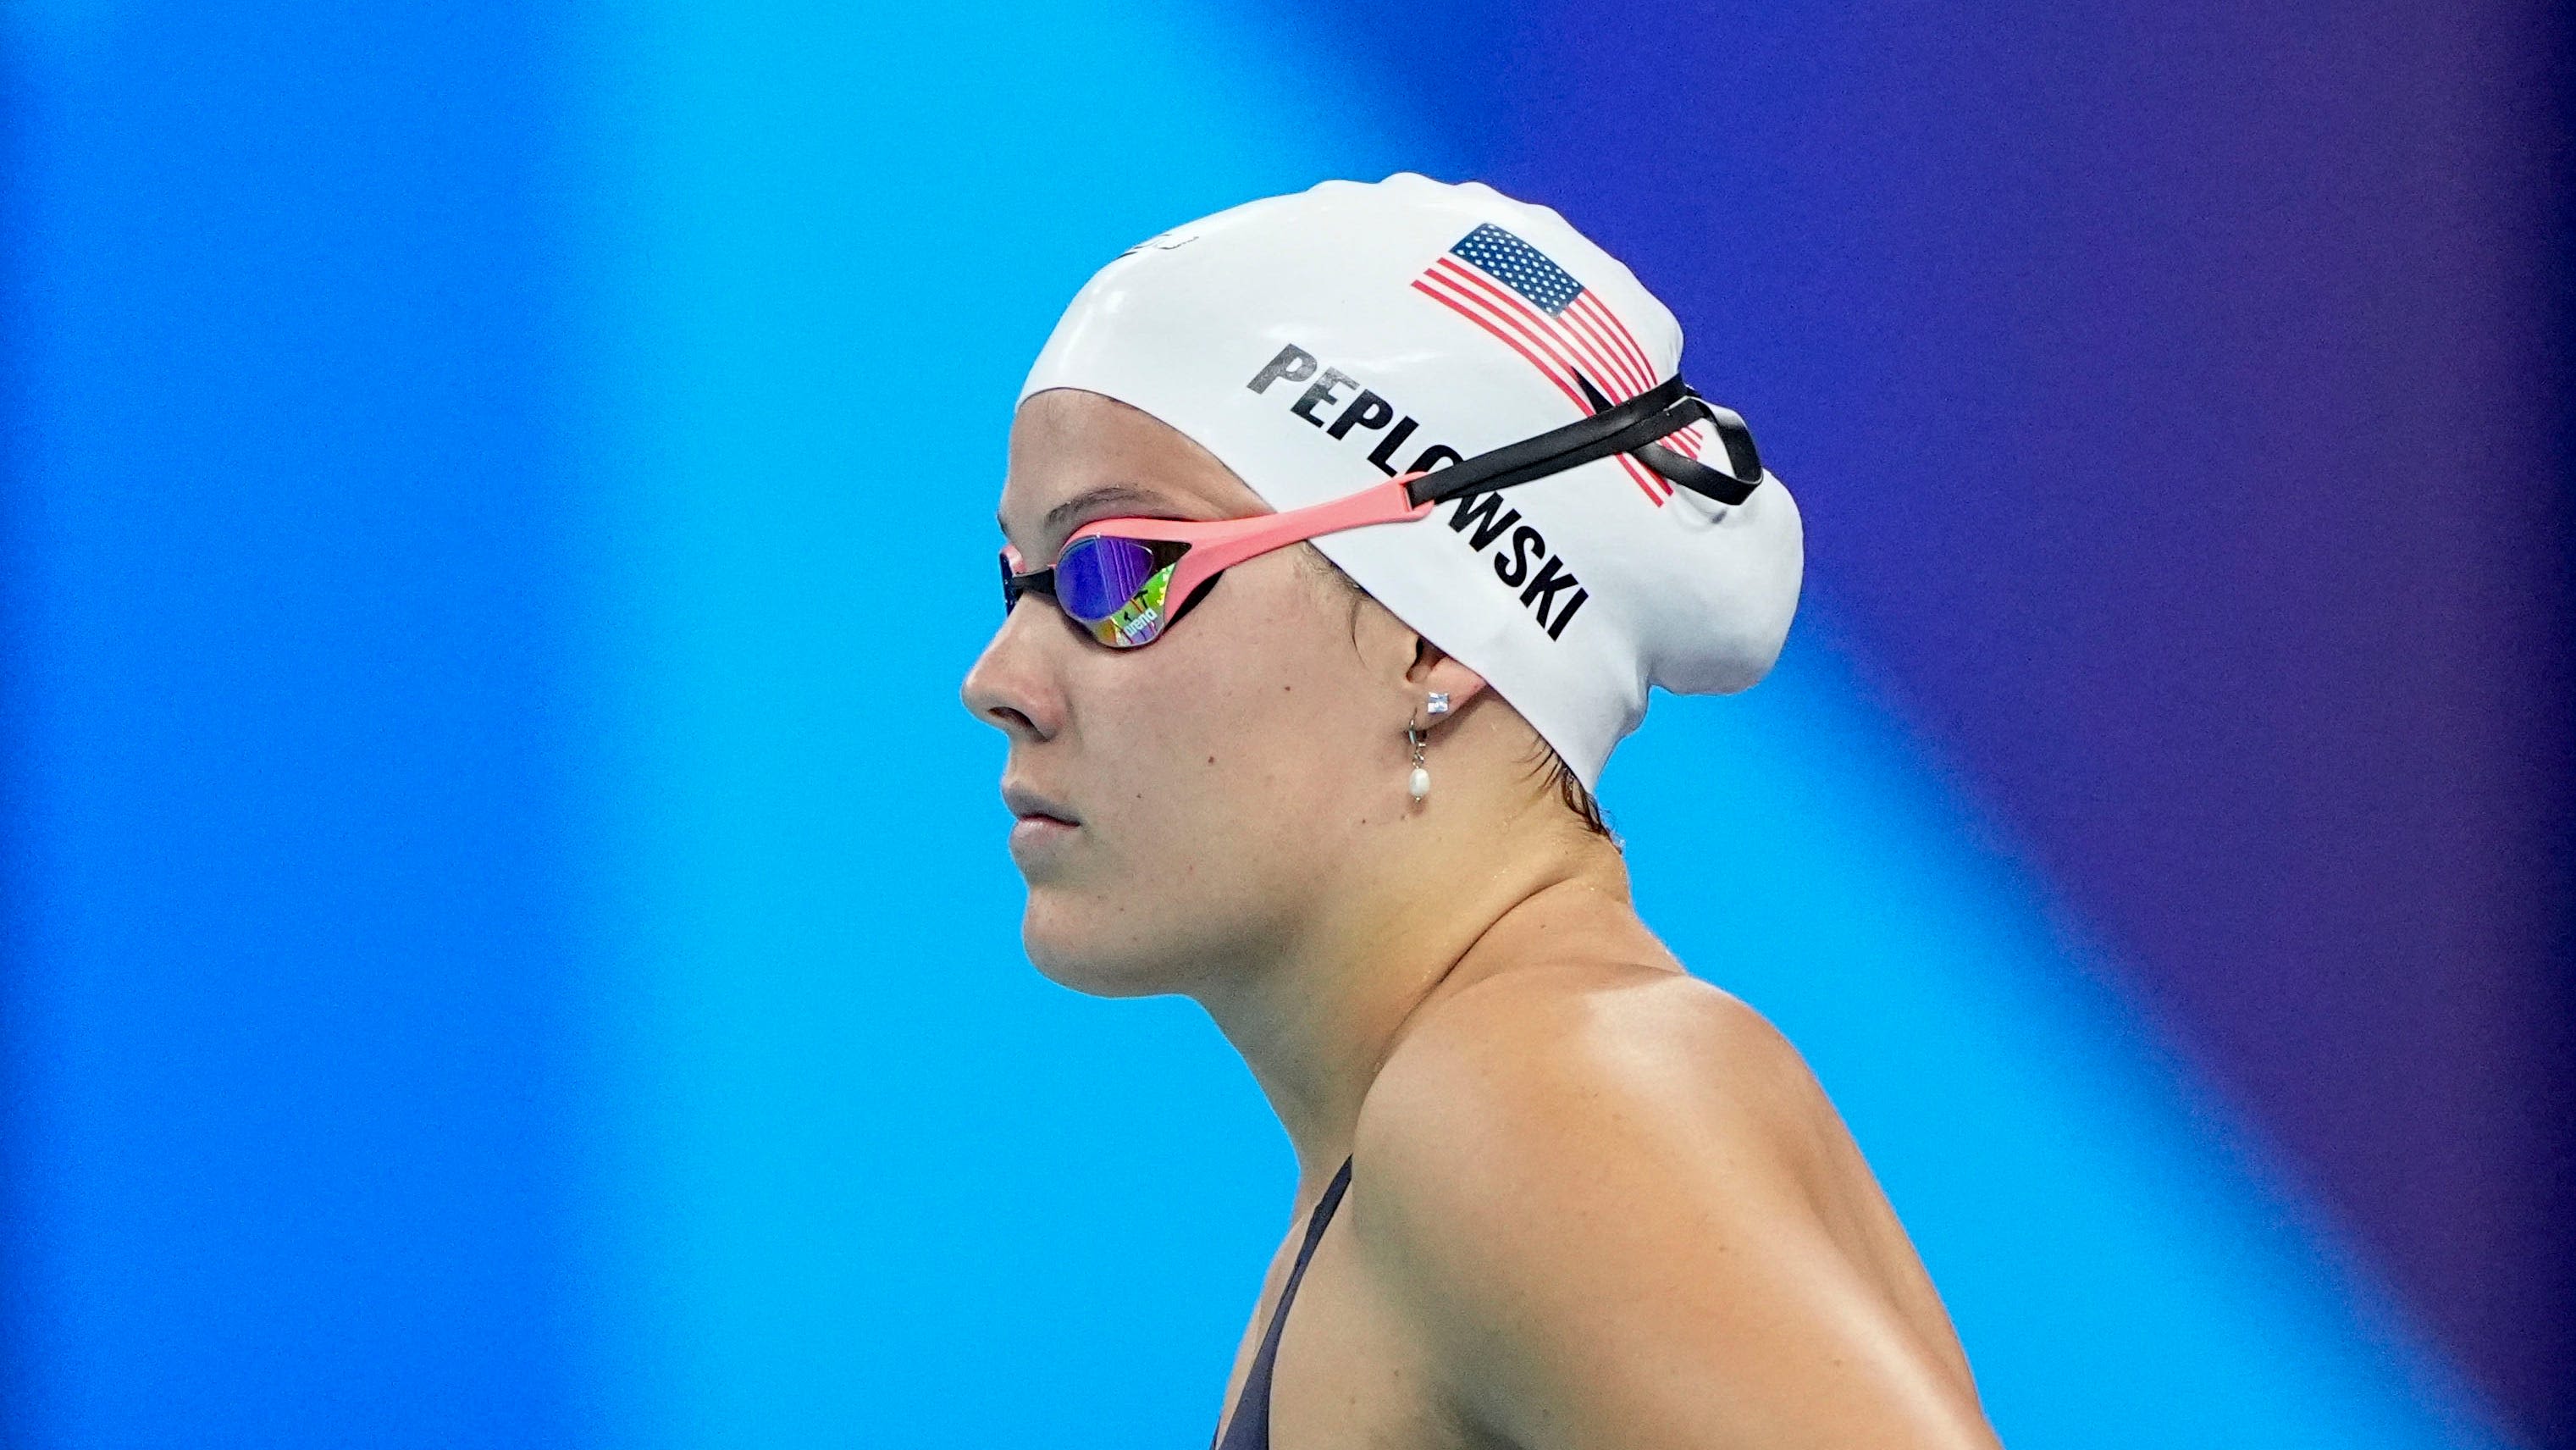 How U.S. swimmer Anna Peplowski of Germantown Hills fared in her Olympic swimming debut